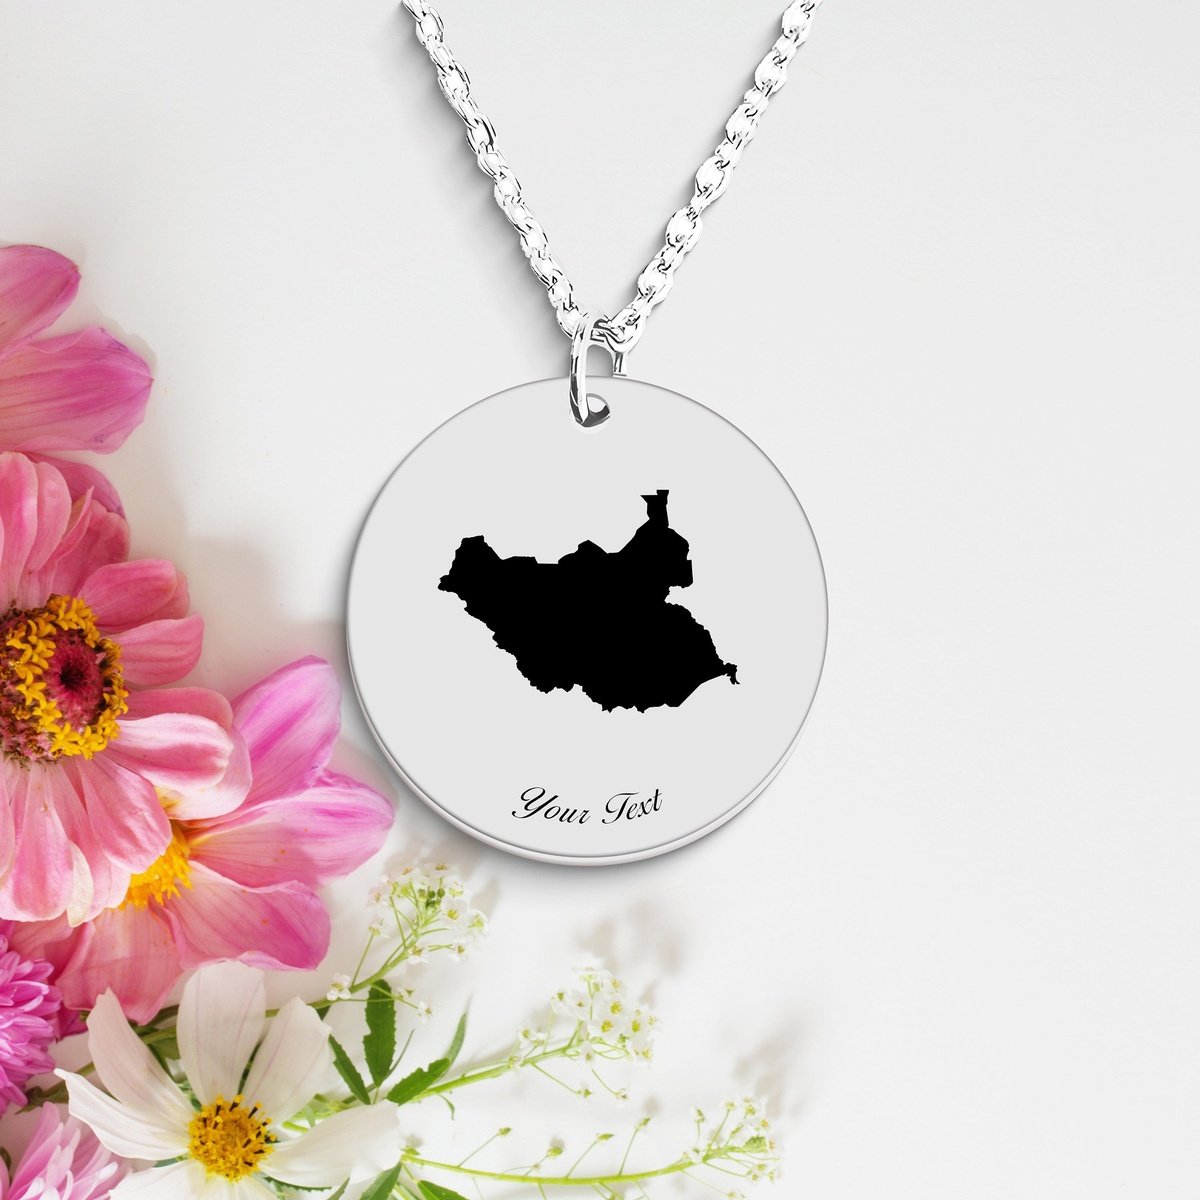 South Sudan Country Map Necklace, Your Name Necklace, Minimalist Necklace, Personalized Gift, Silver Necklace, Gift For Him Her